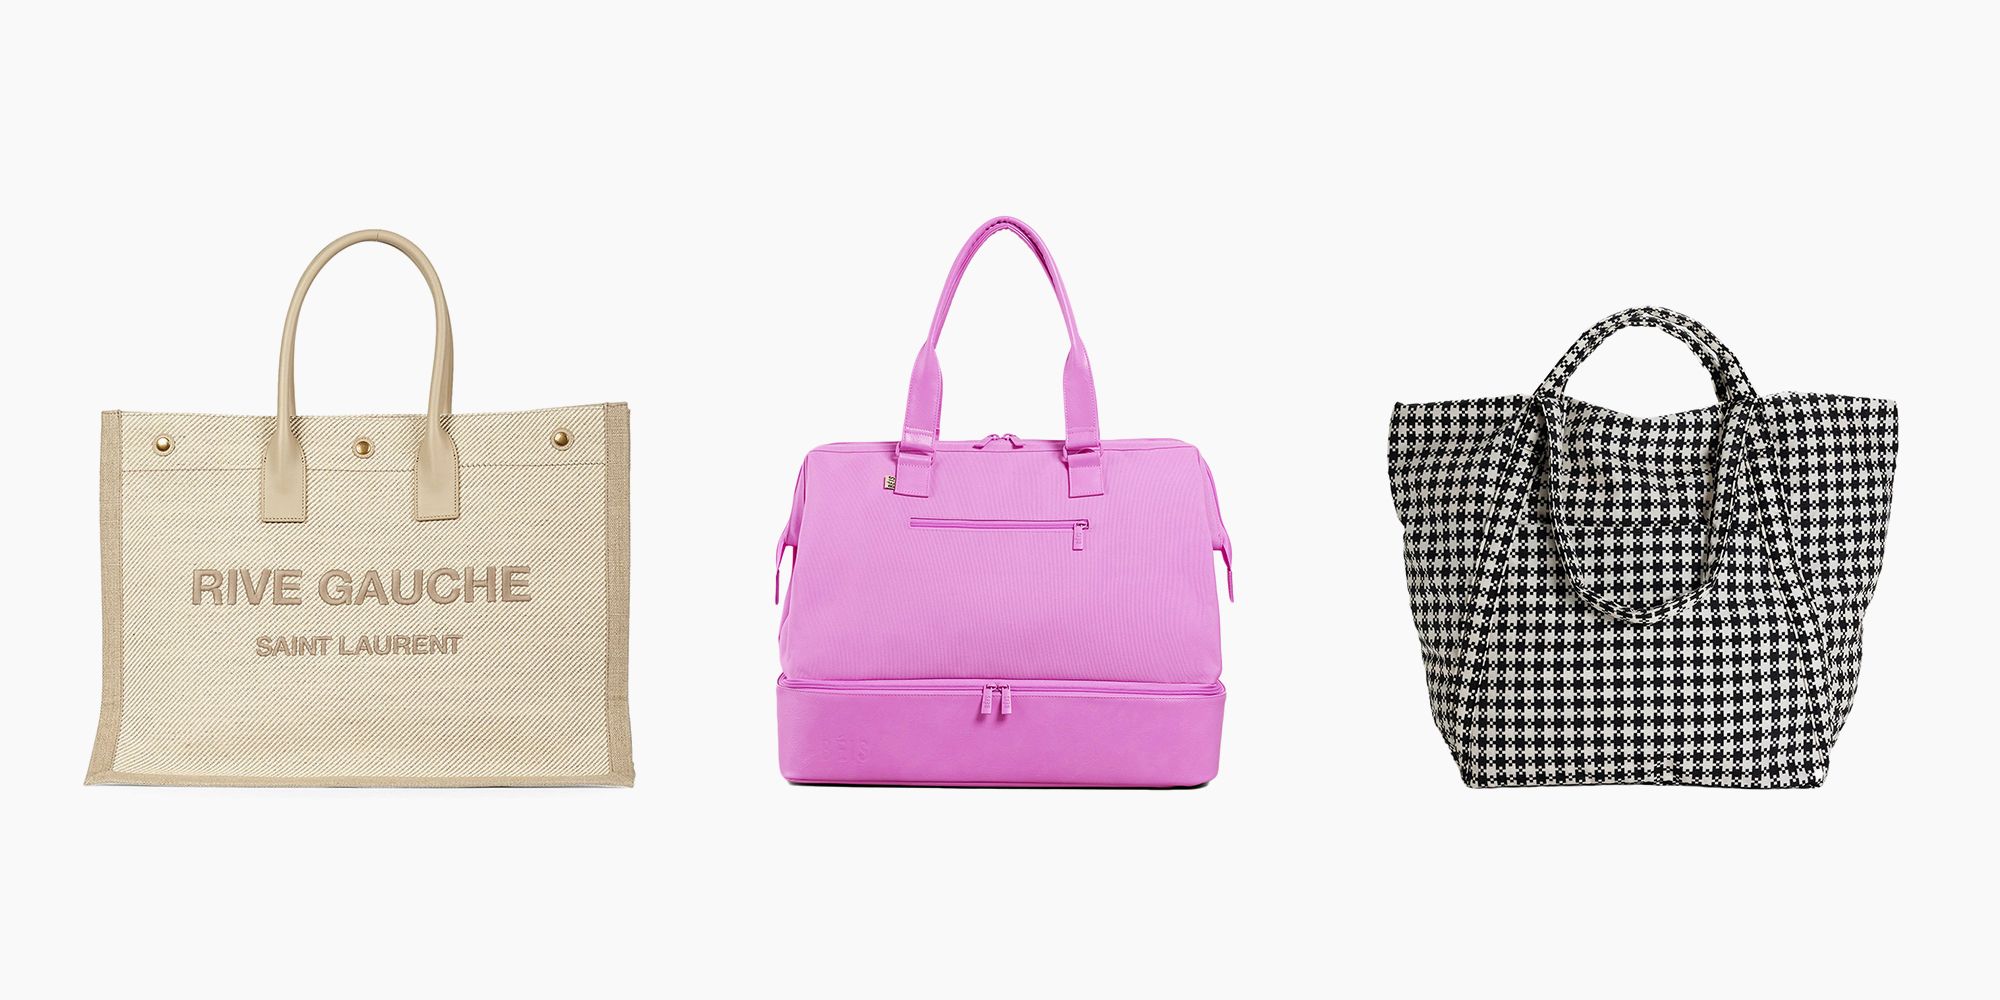 10 Tote Bags From Nordstrom Under $200 That Are Good for Travel